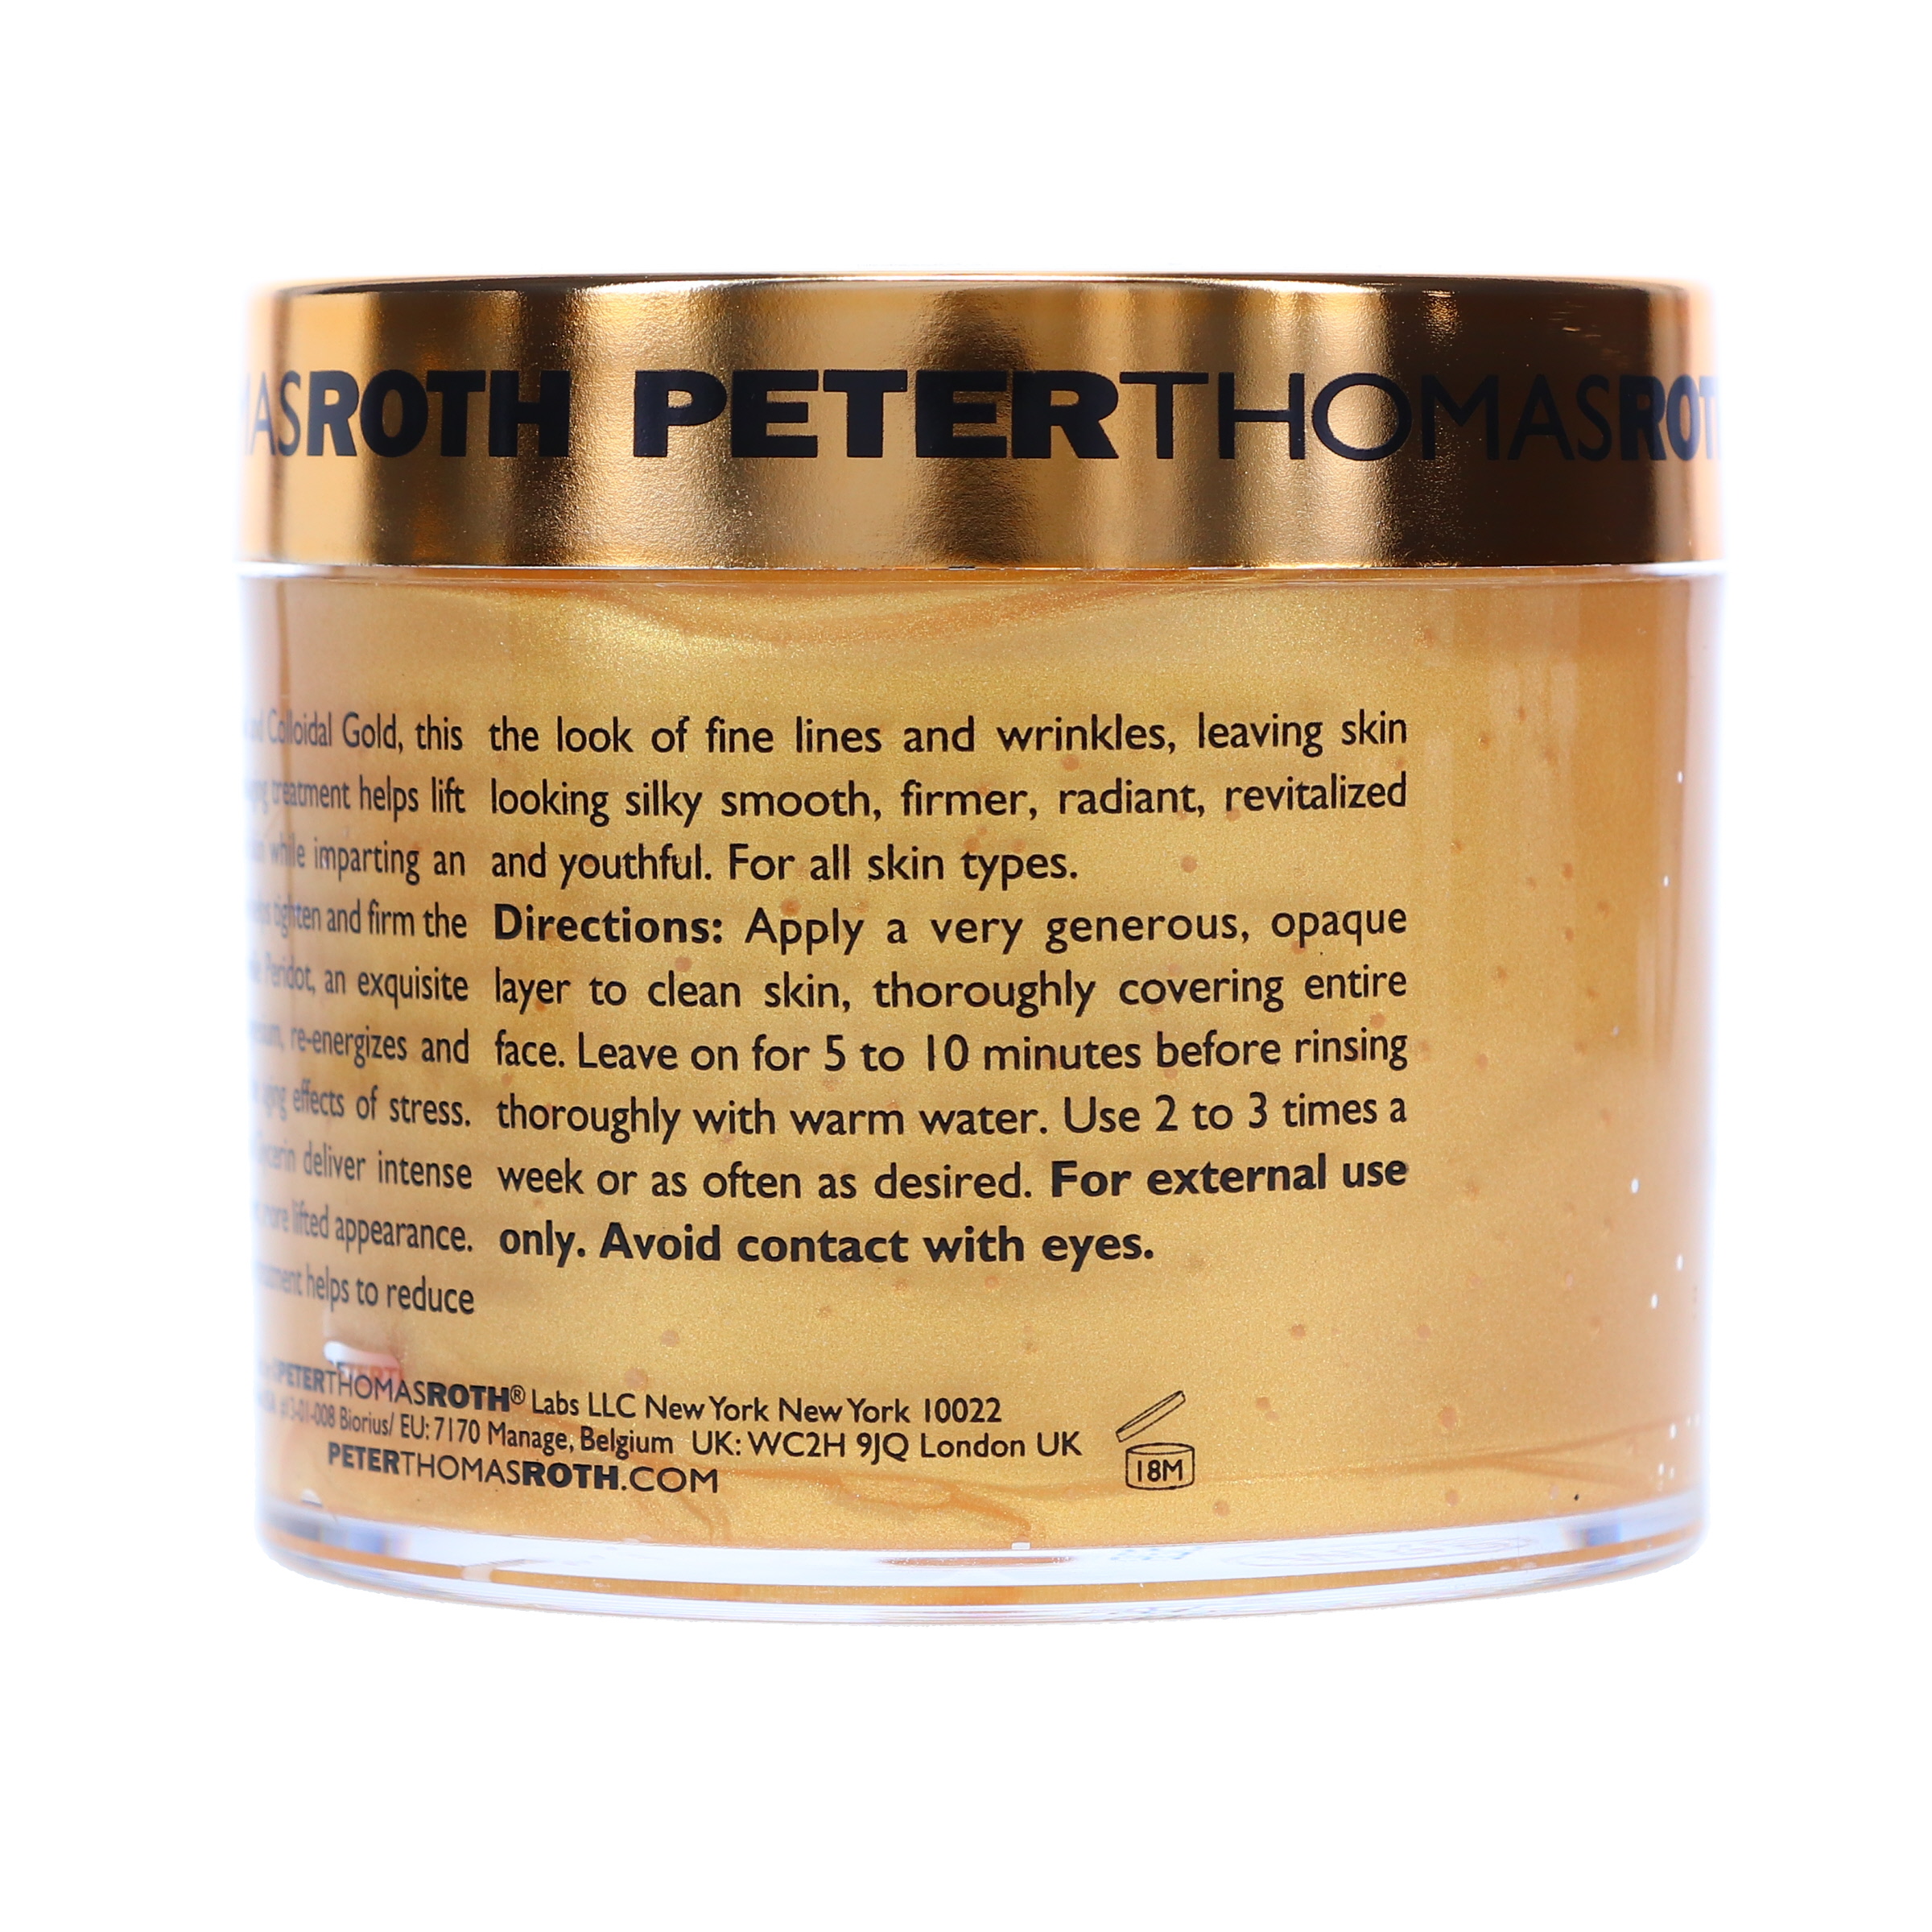 Peter Thomas Roth 24K Gold Mask Pure Luxury Lift & Firm Mask 5.1 oz - image 5 of 8